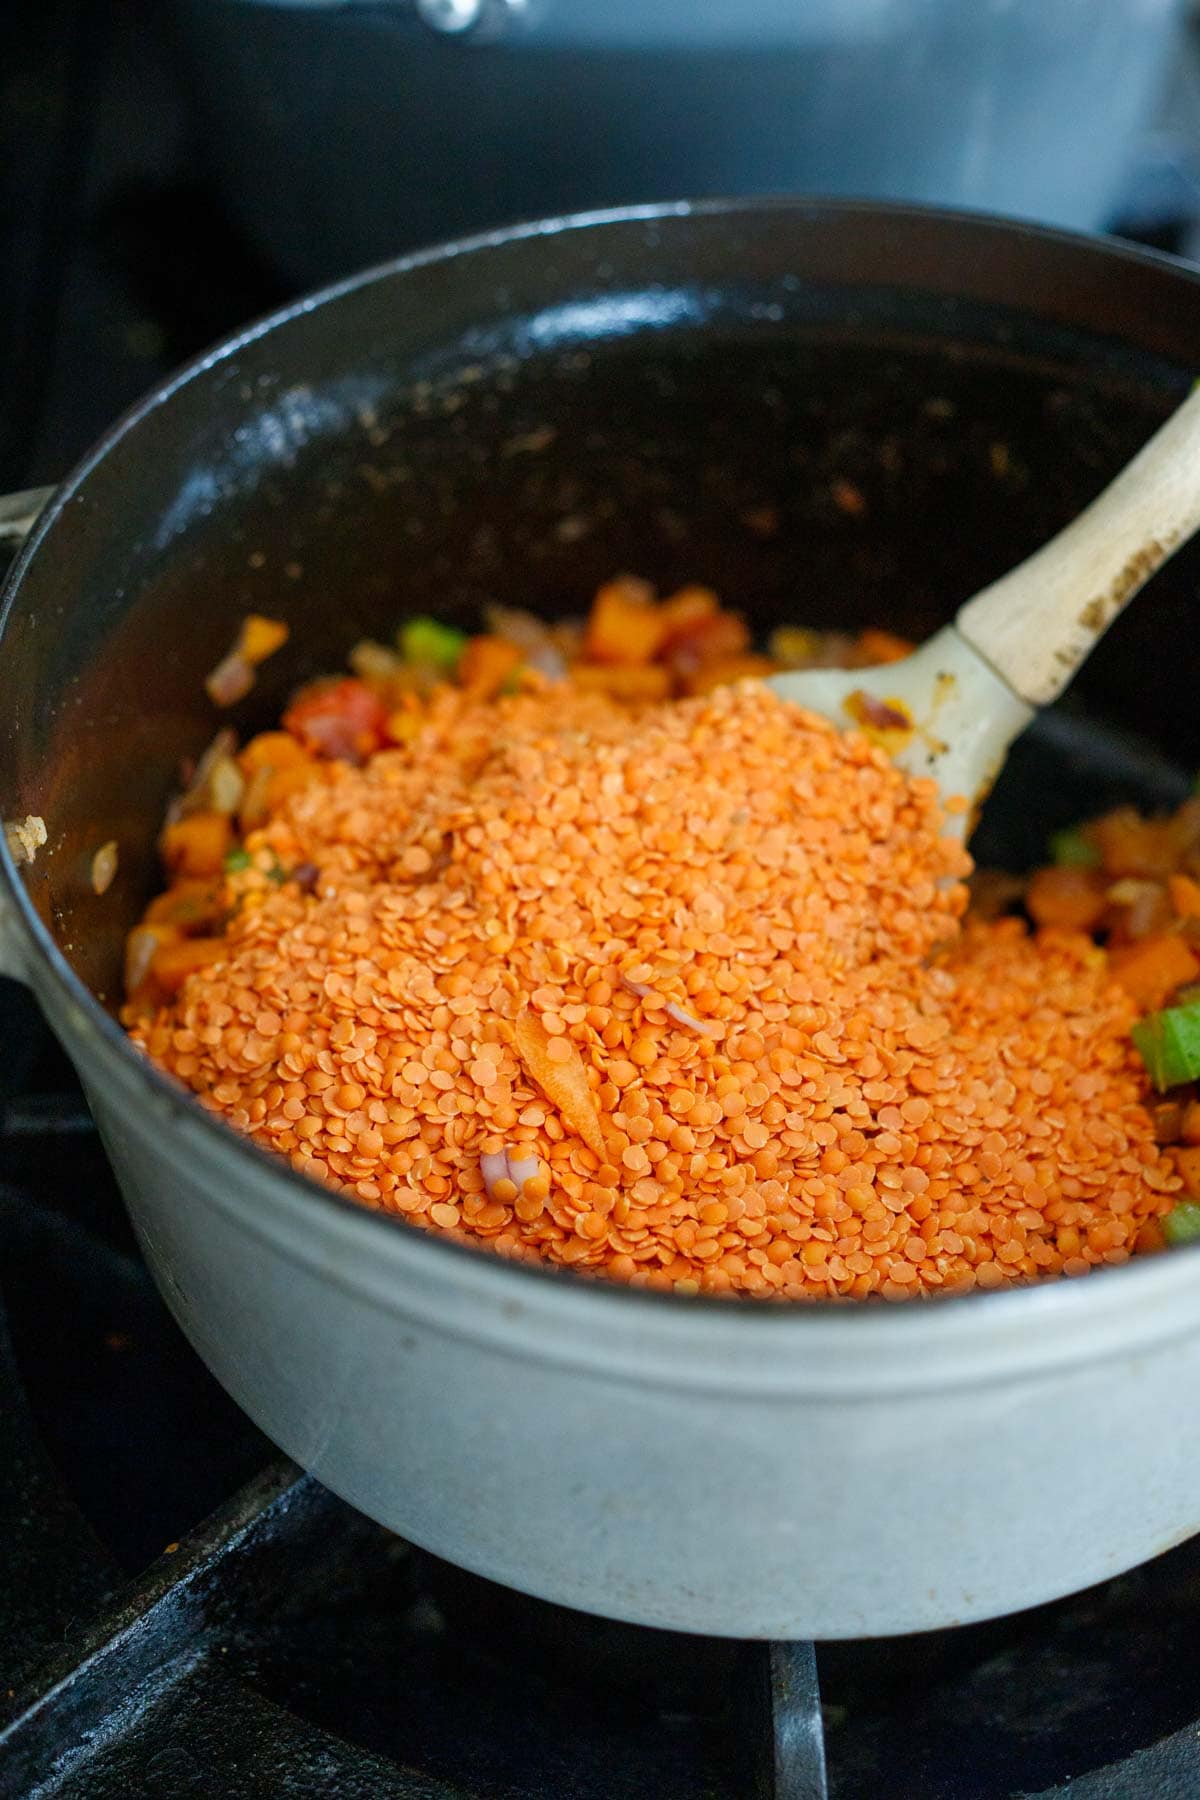 red lentils added to dutch oven with cooked vegetables.